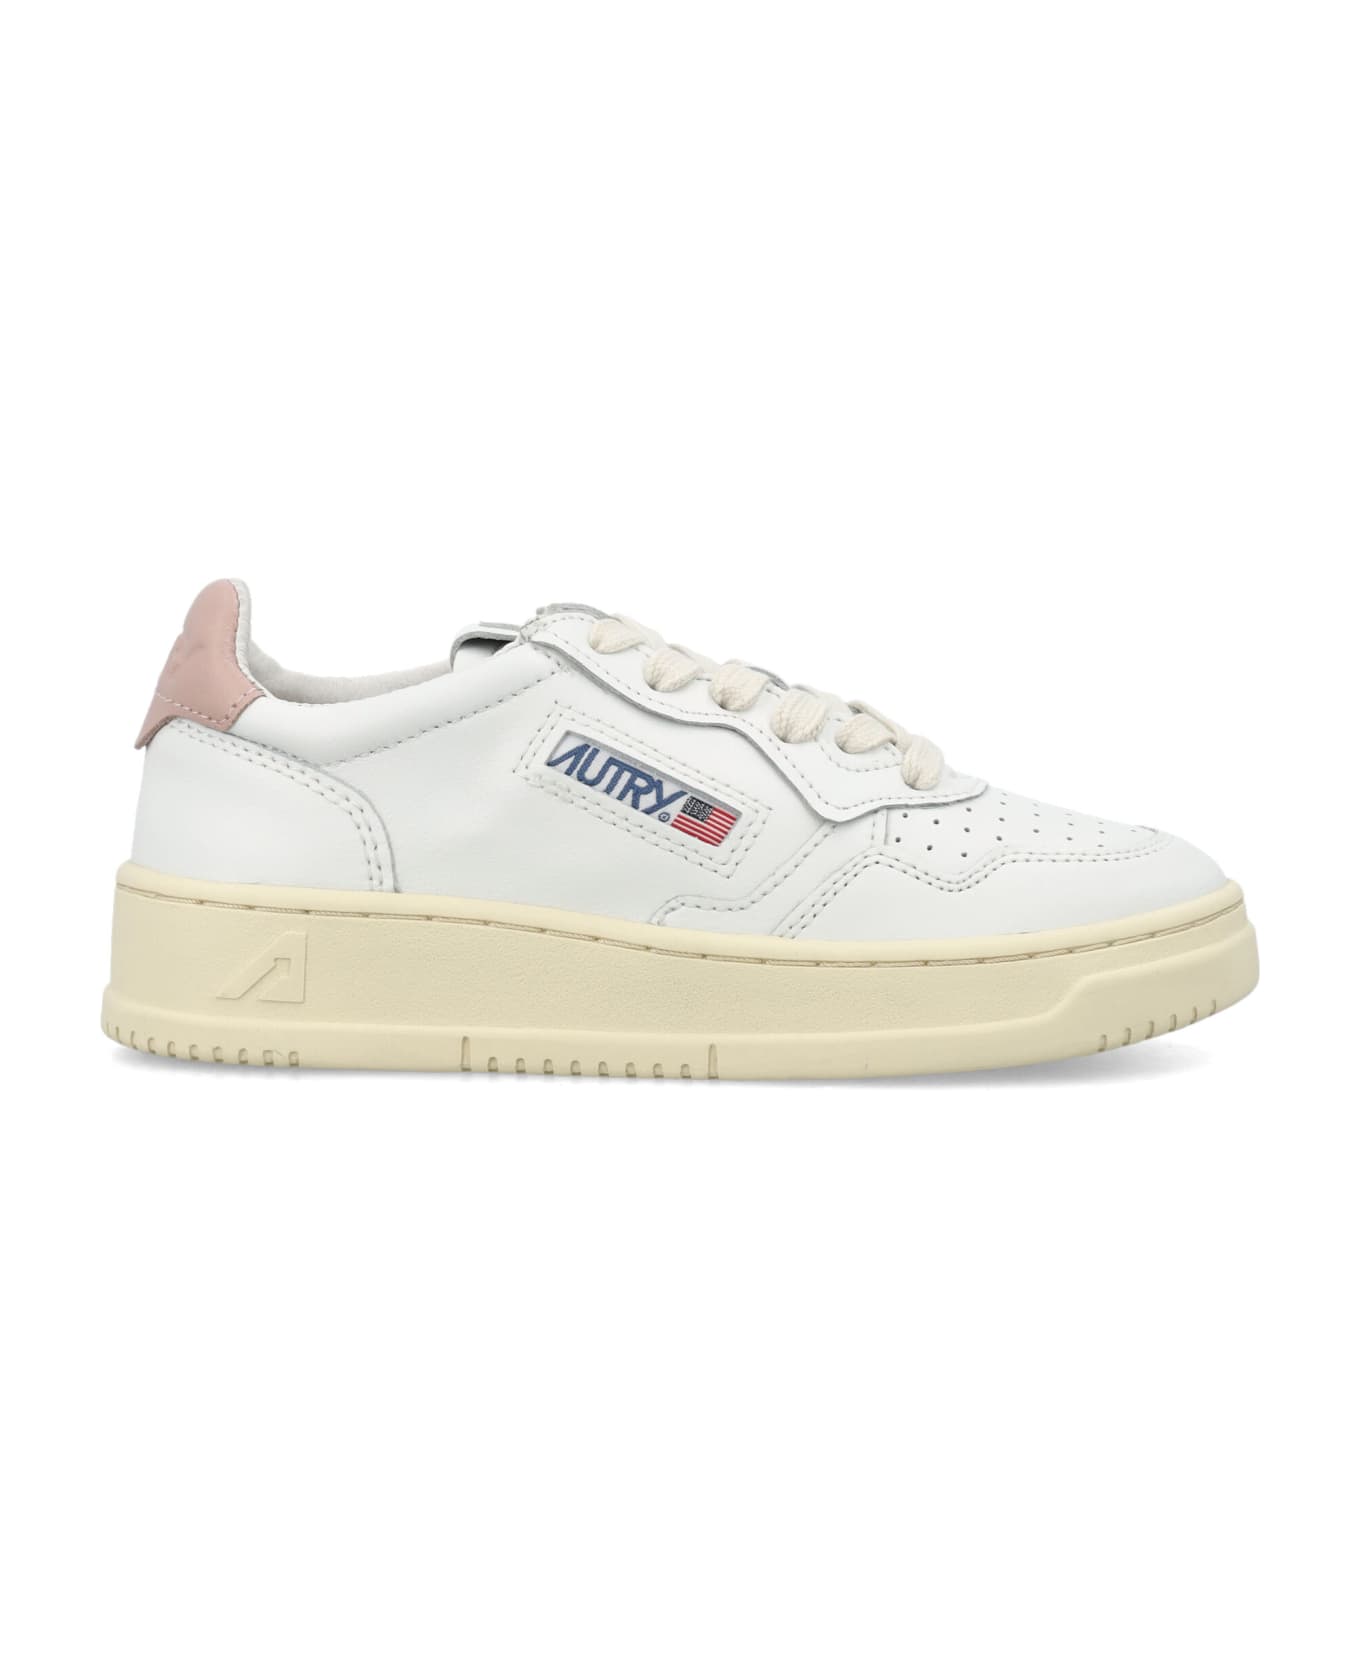 Autry Medalist Low Sneakers - WHITE PINK シューズ